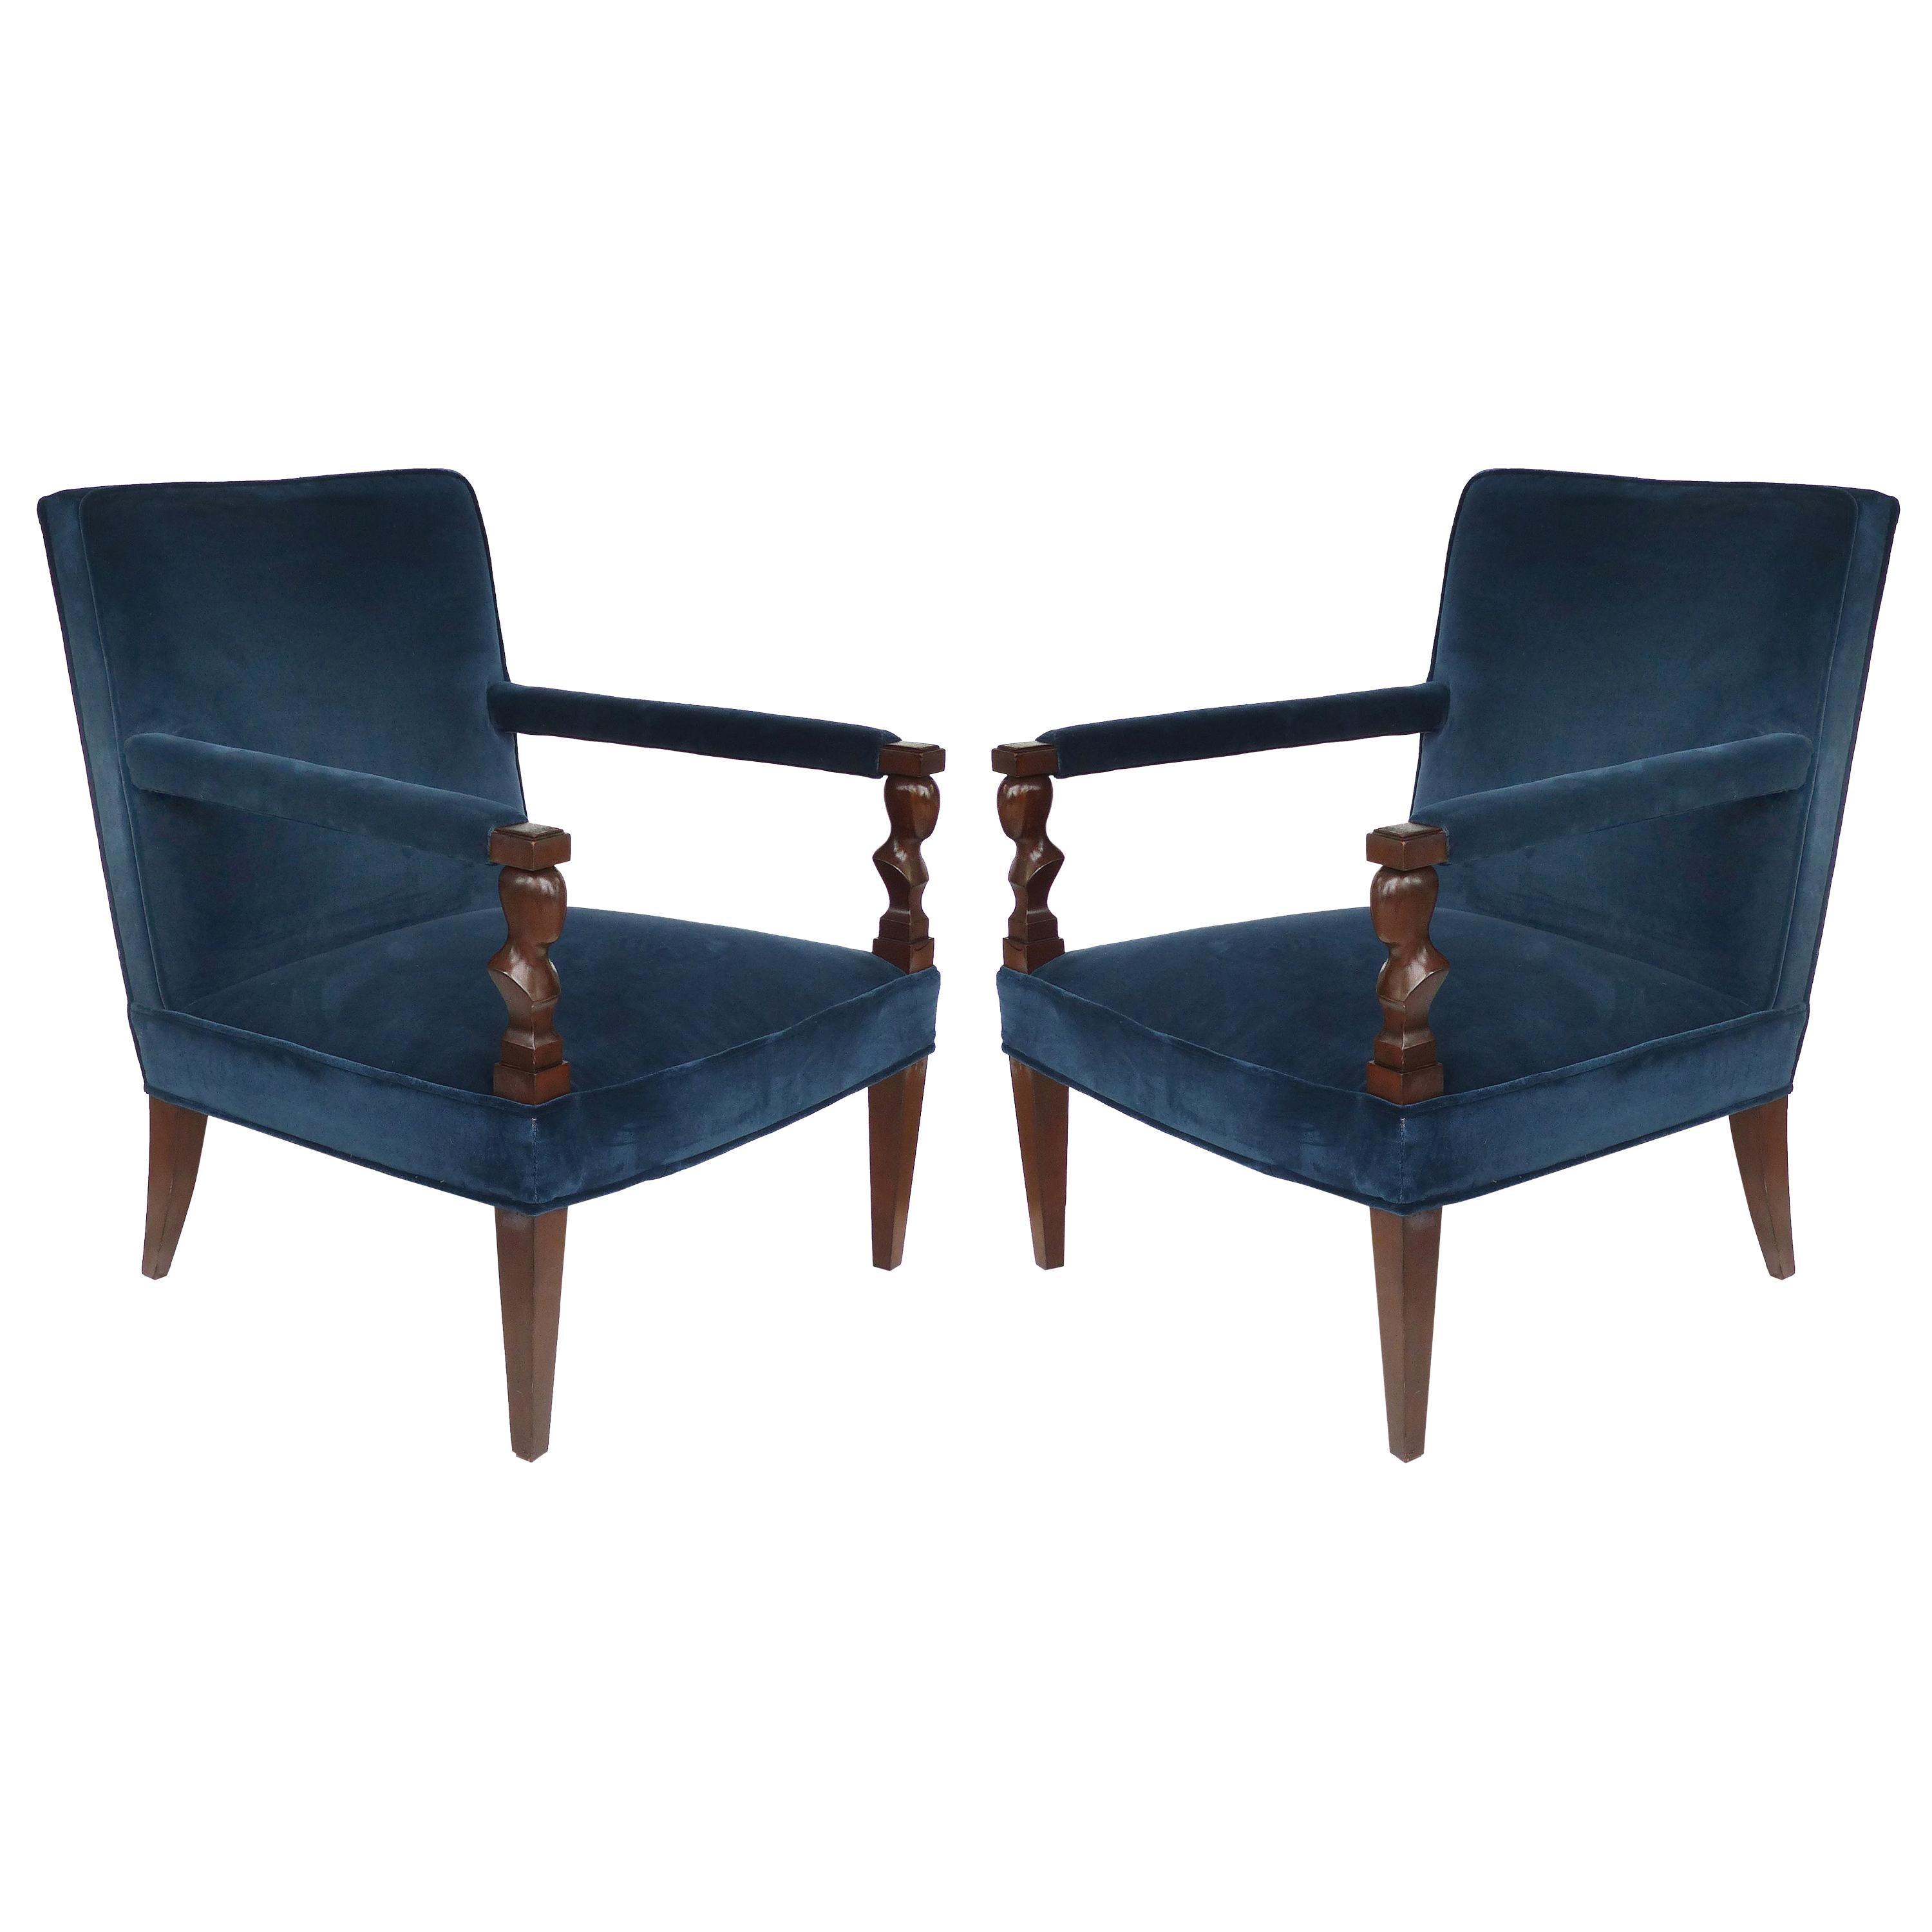 John Hutton Donghia "Rushmore" Newly Upholstered Armchairs , Pair